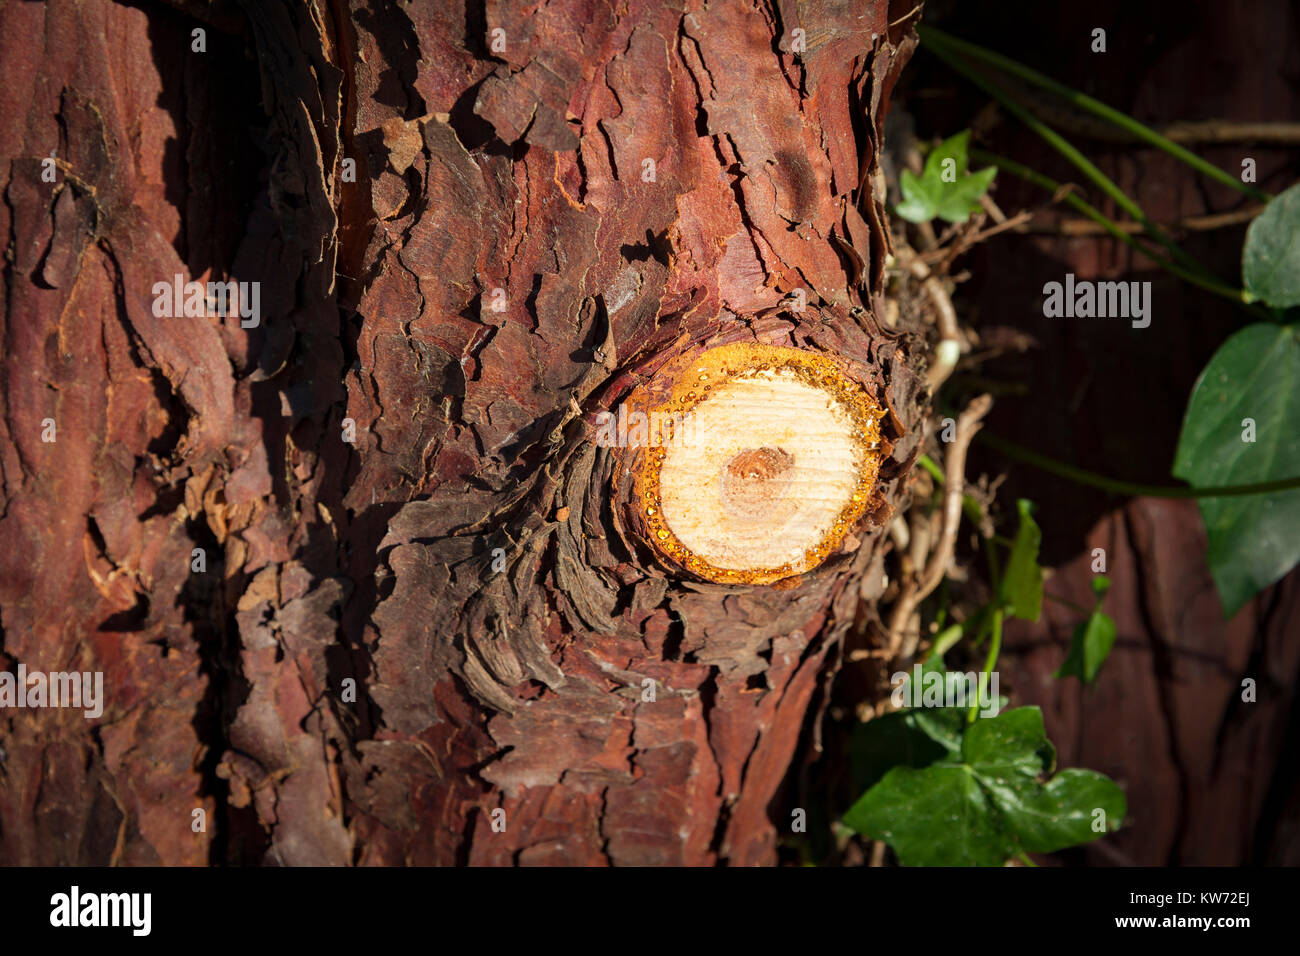 Sap weeping from a freshly cut tree branch Stock Photo